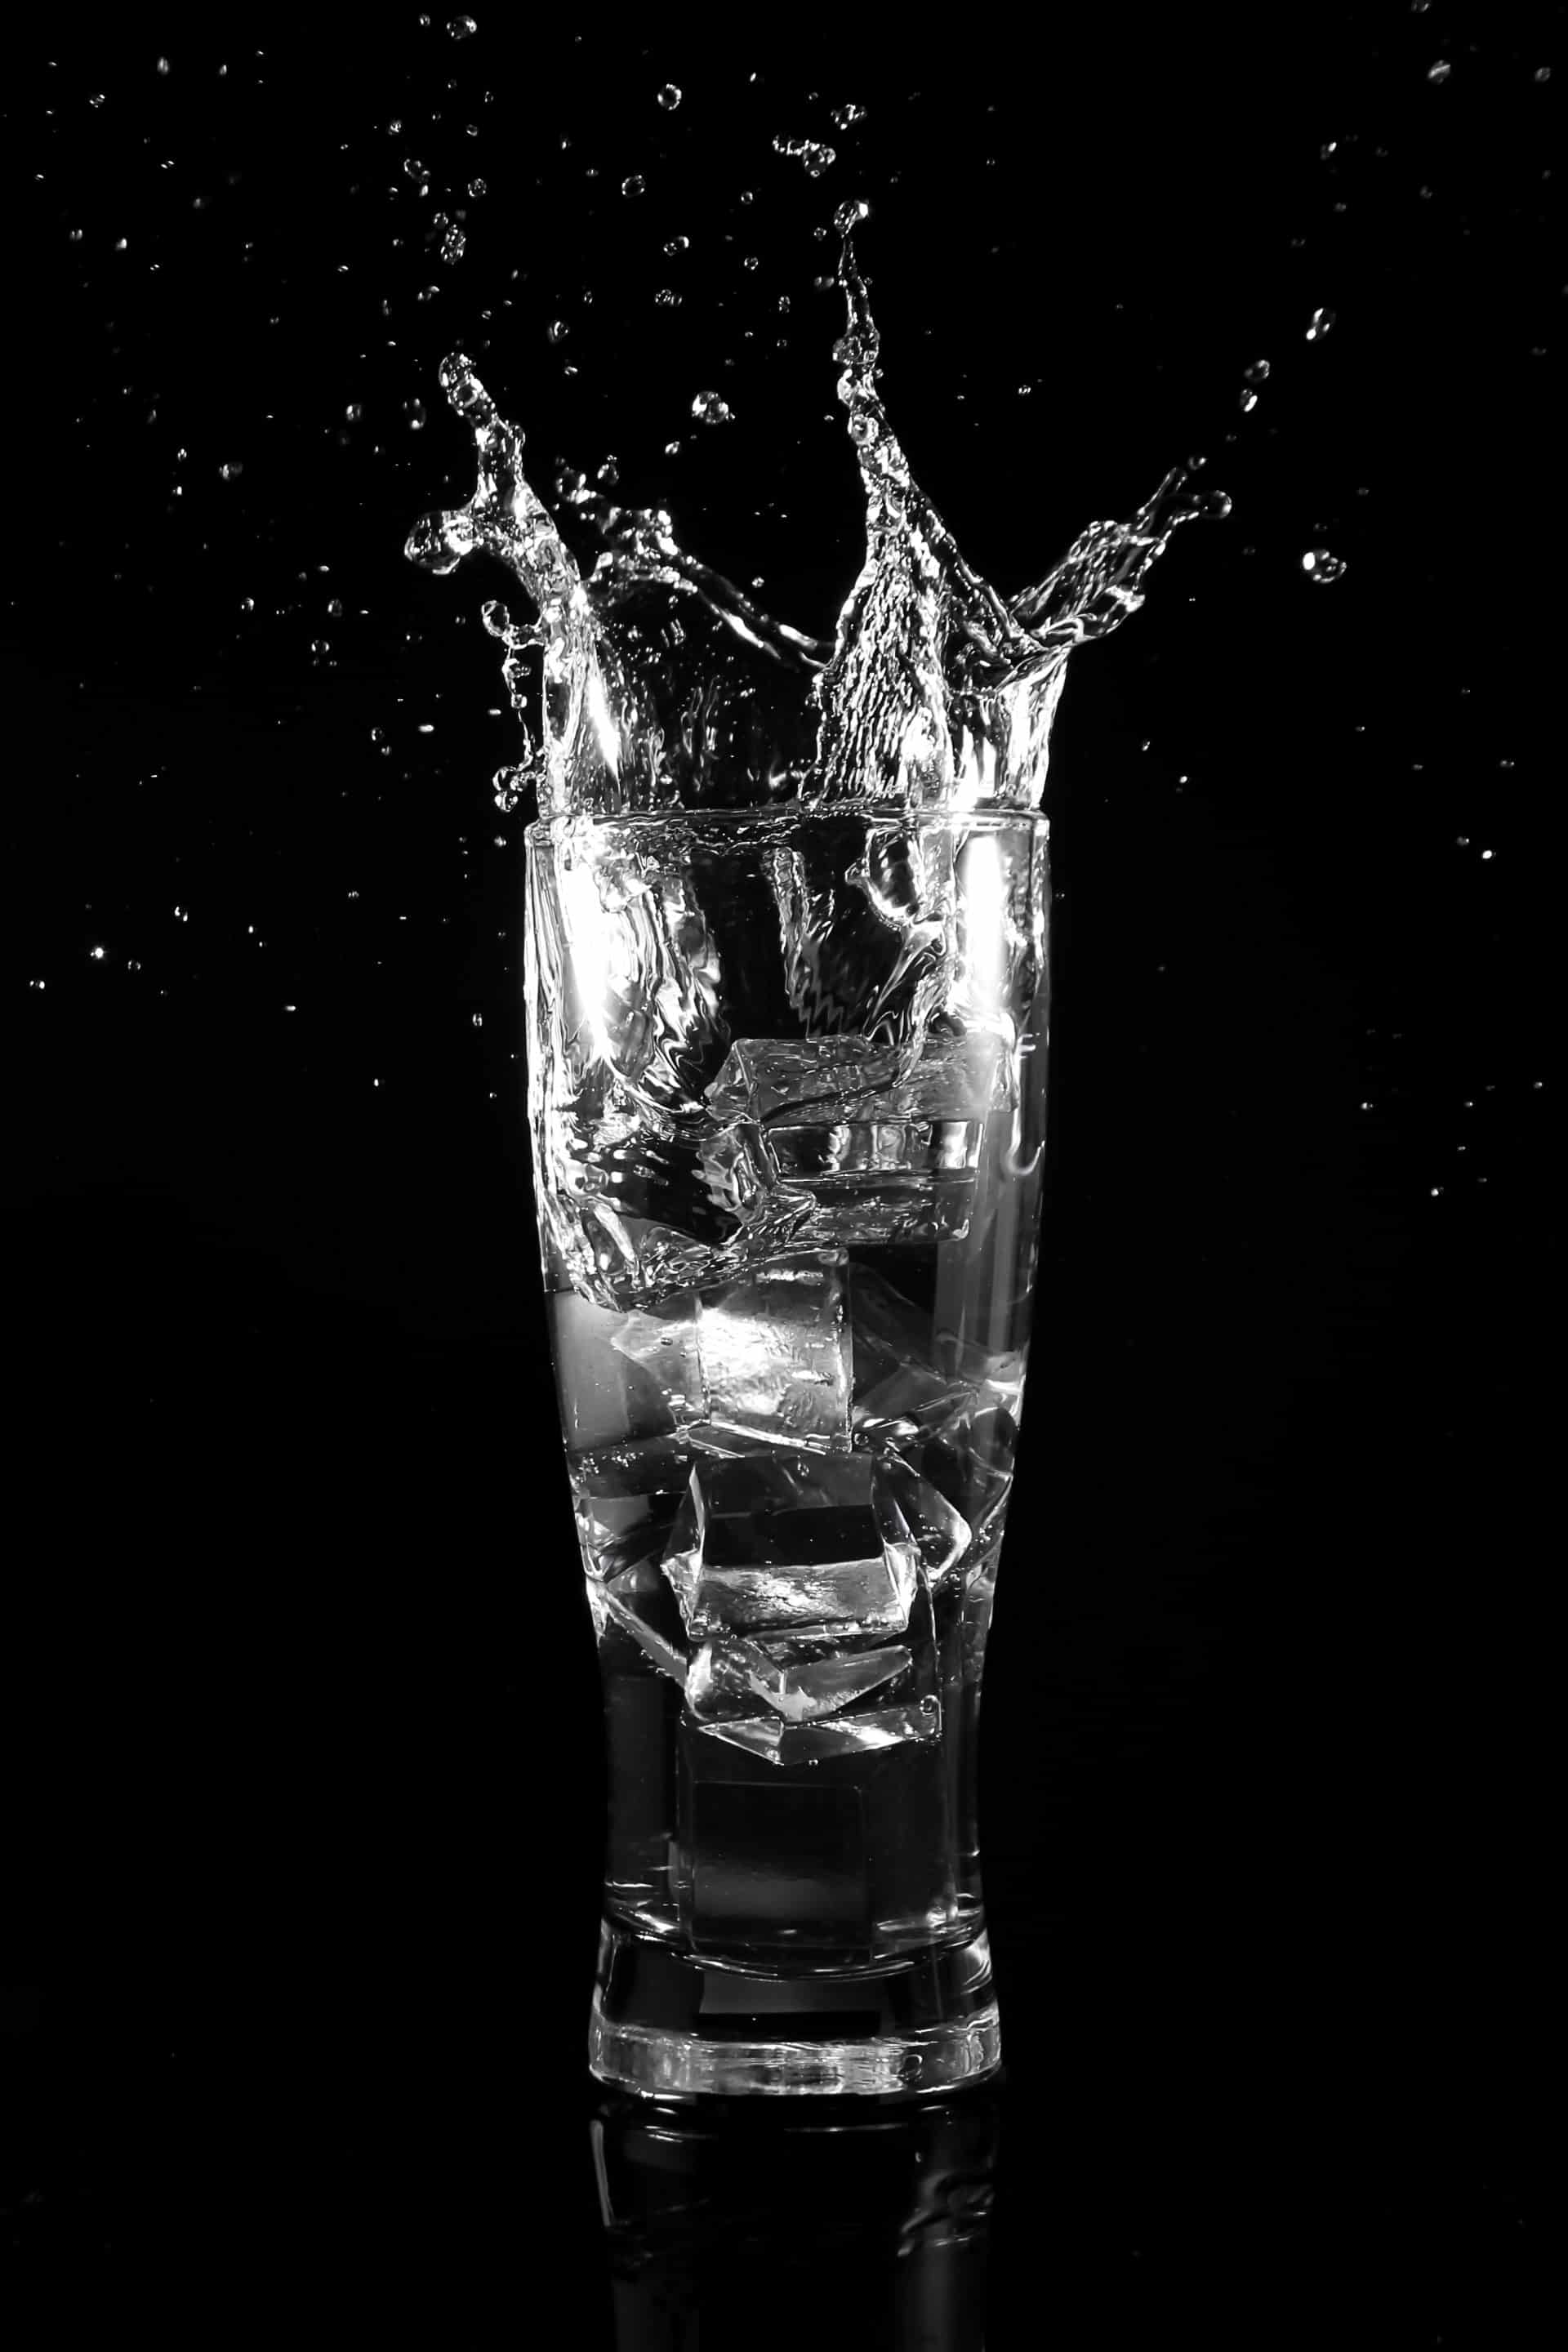 Glass of ice water scattered on a black background